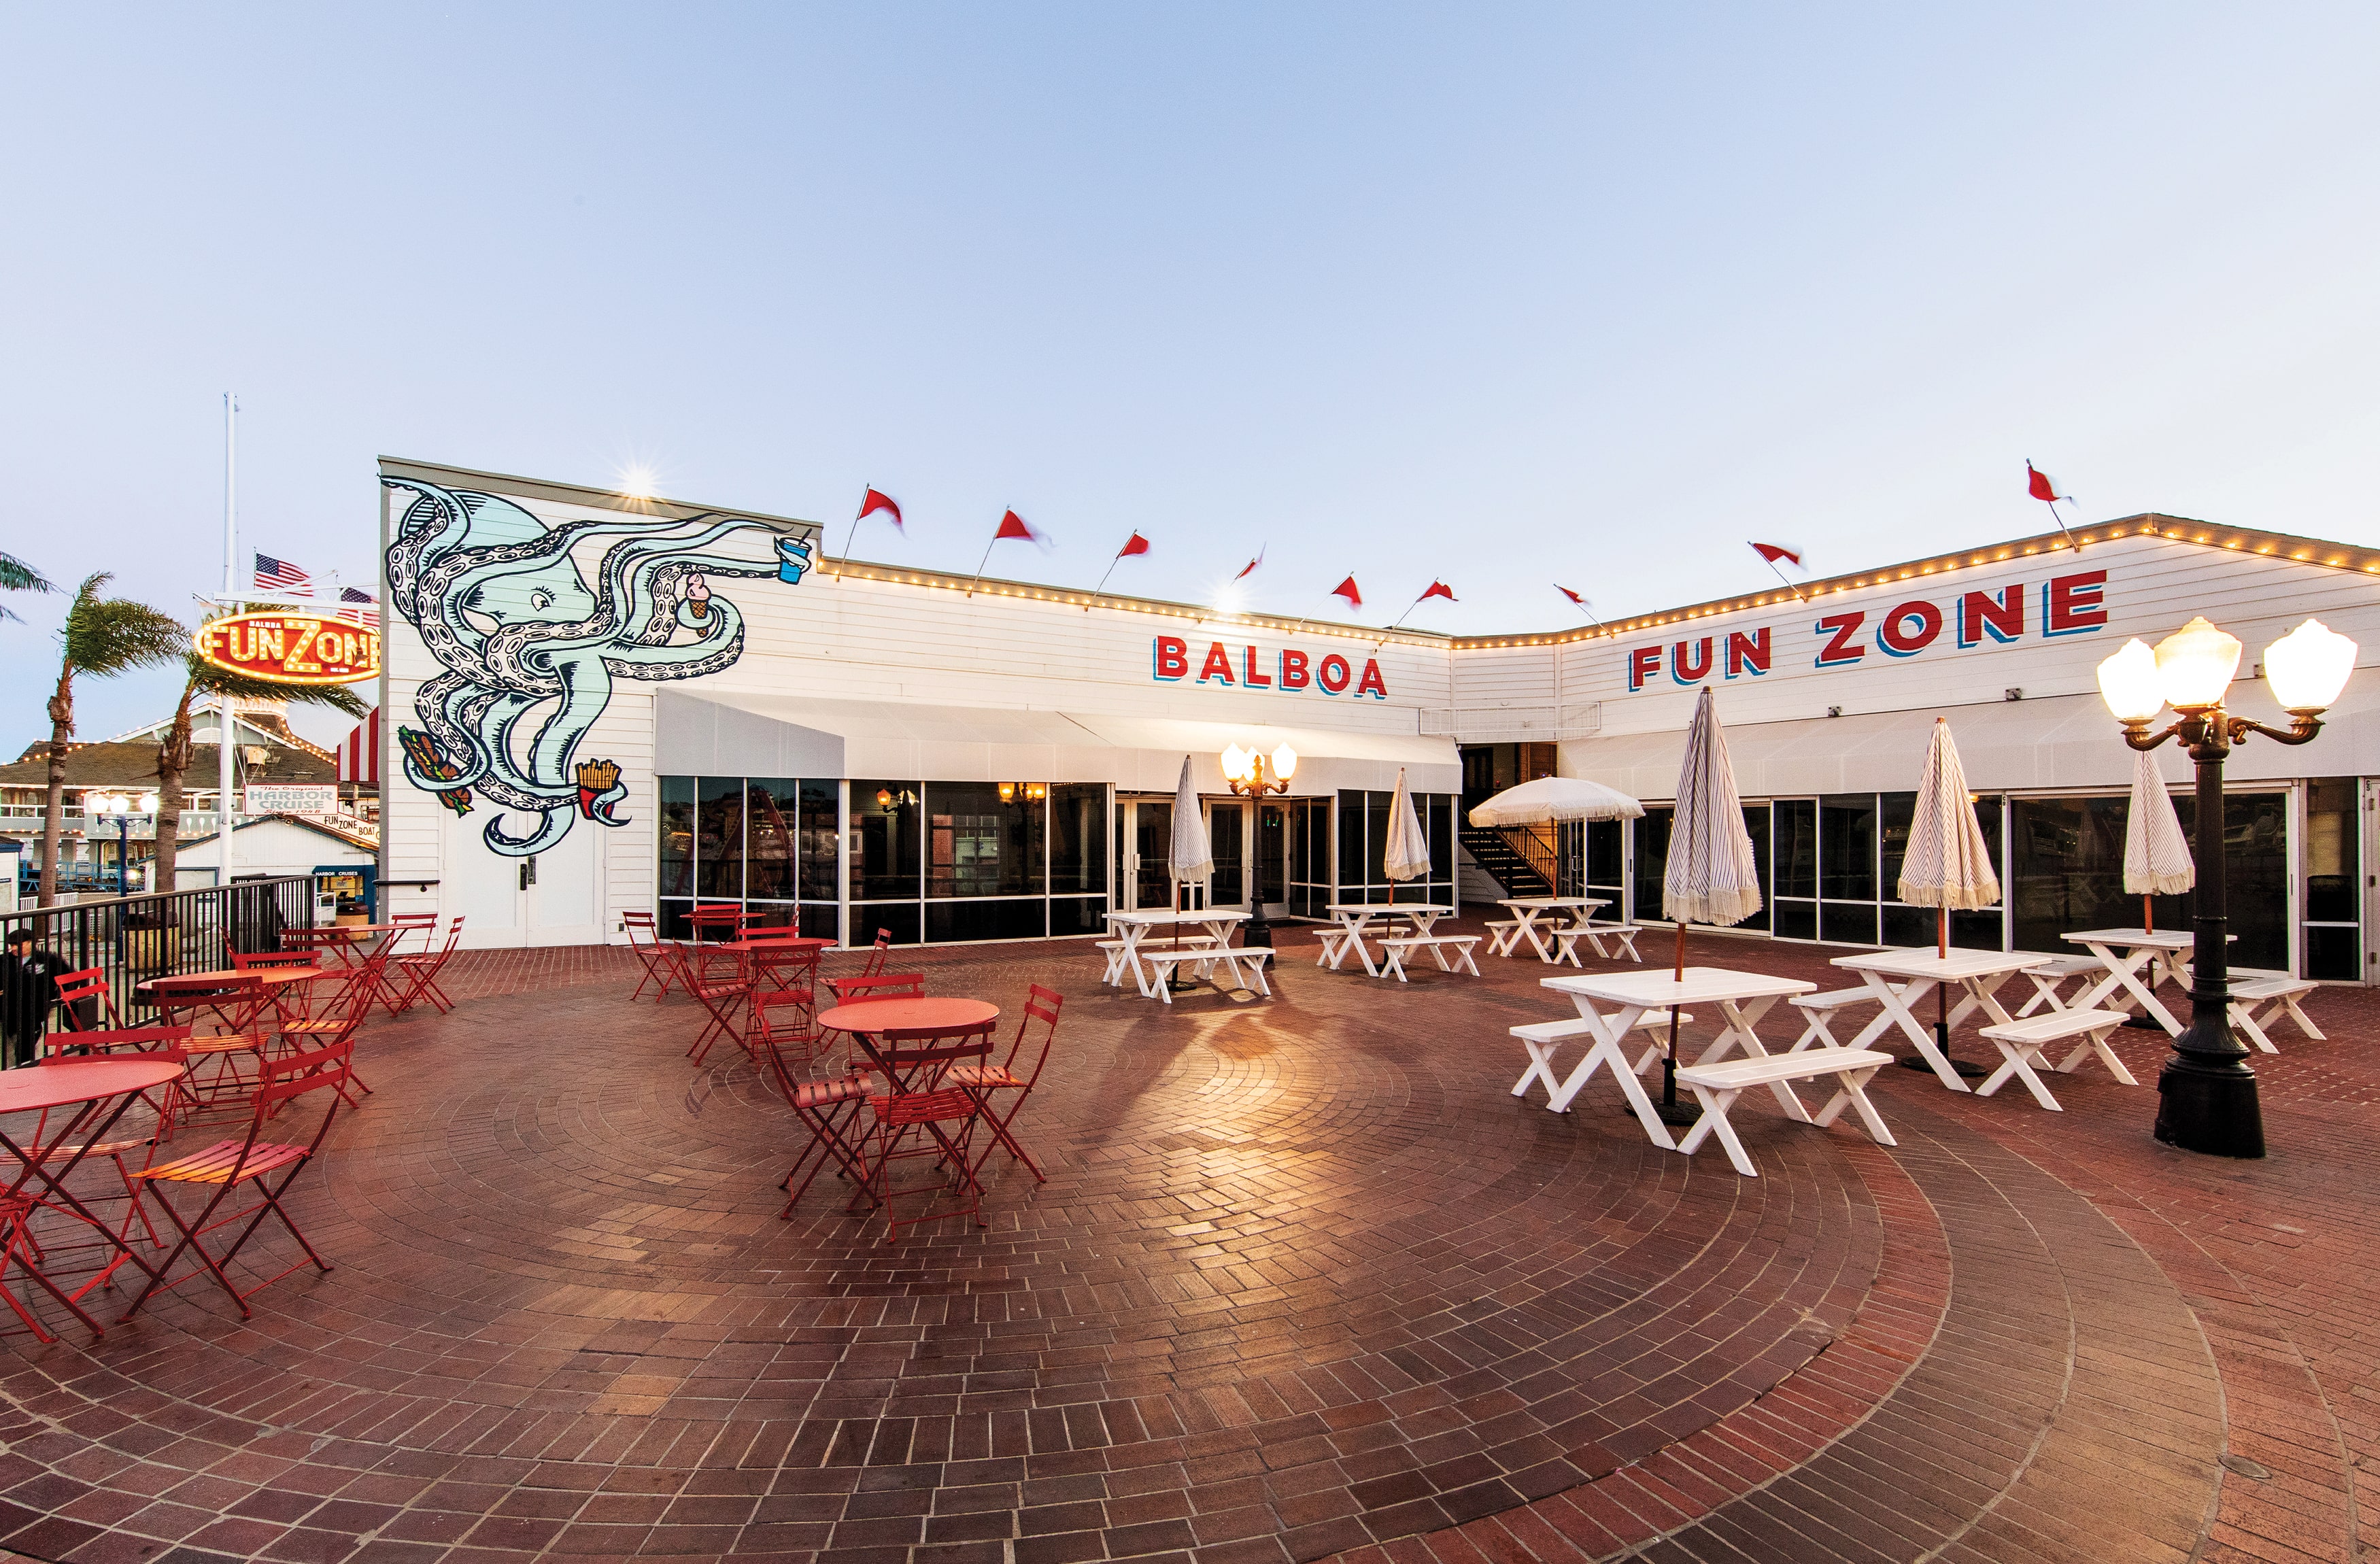 Open plaza of seats and benches at Balboa Fun Zone with an octopus mural and painted identity